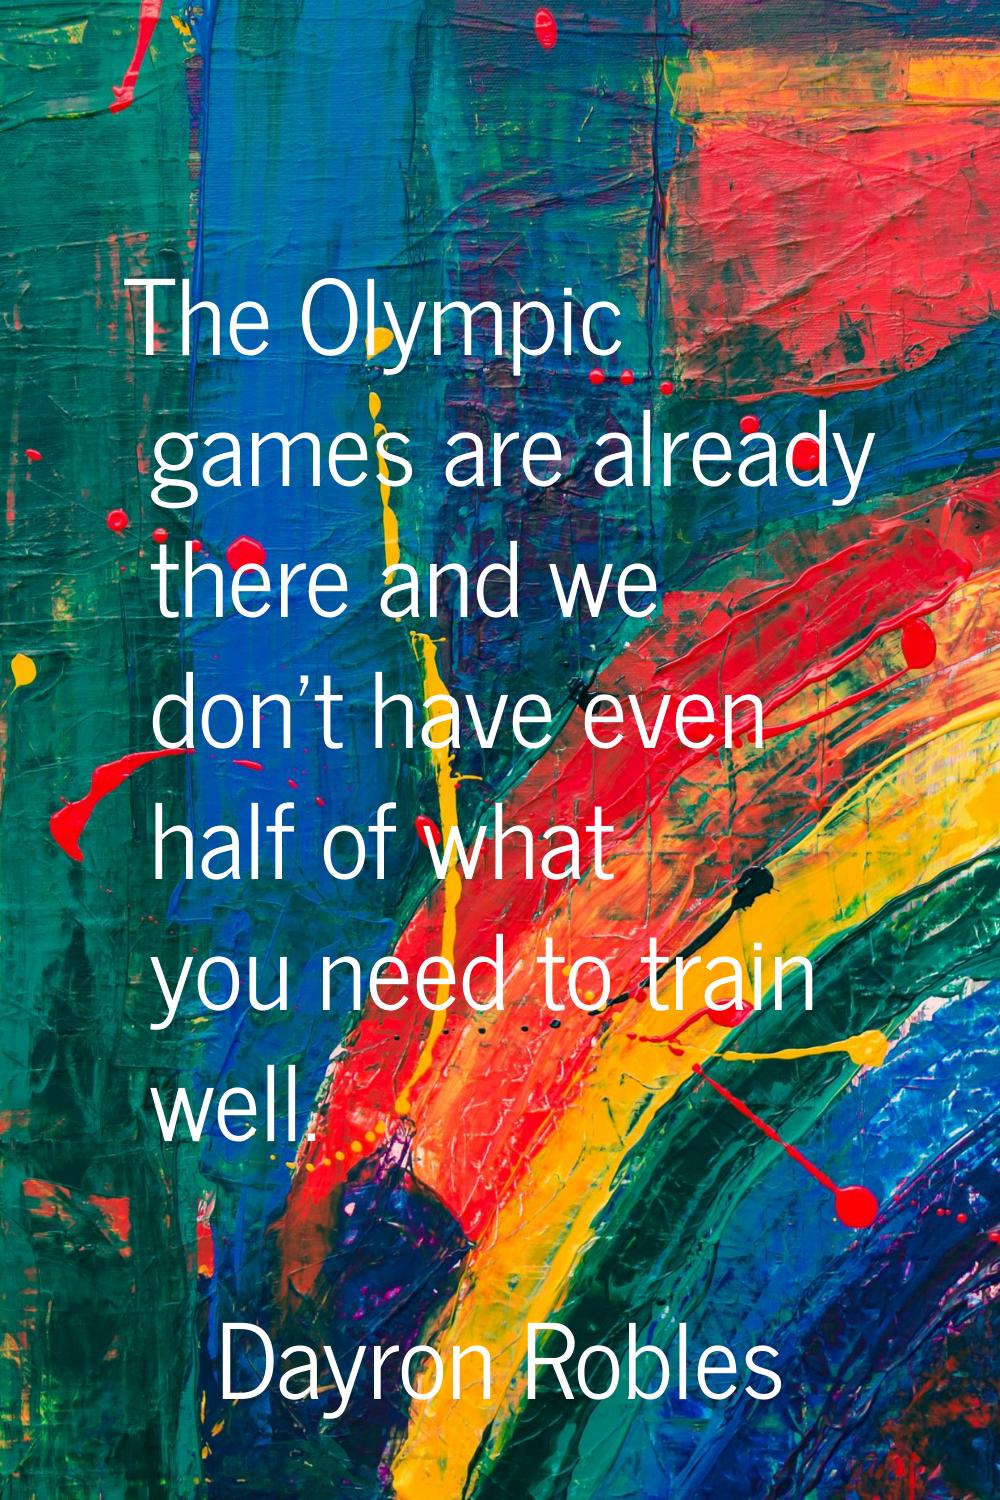 The Olympic games are already there and we don't have even half of what you need to train well.